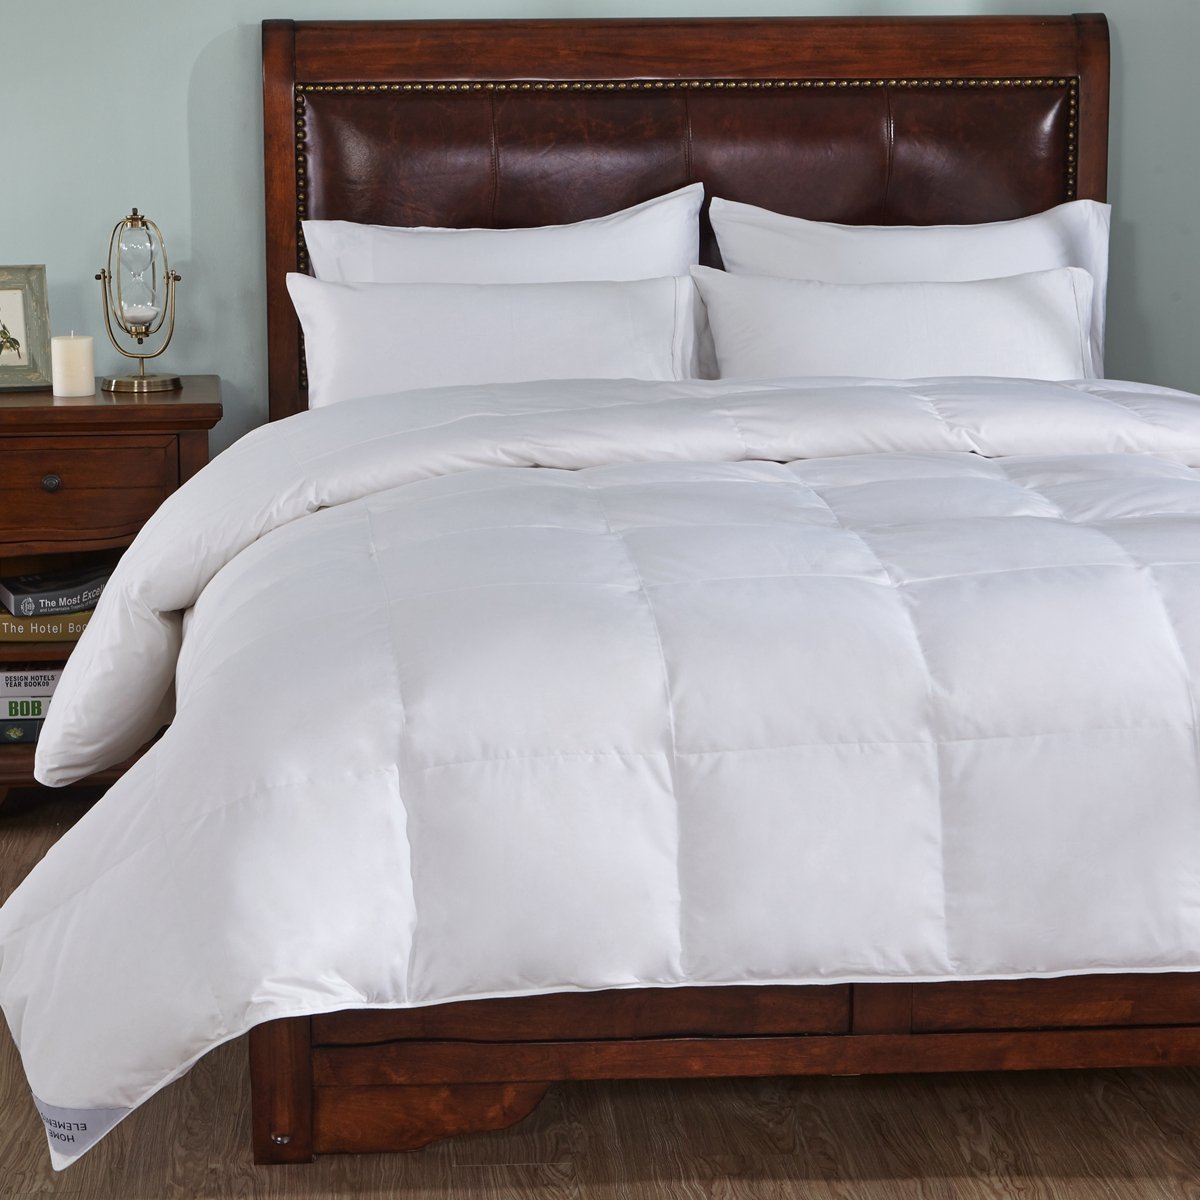 Home Element 800 Thread Count Medium Warmth White Goose Down Comforter 600 Fill Power-Full/Queen Size, Stripe White